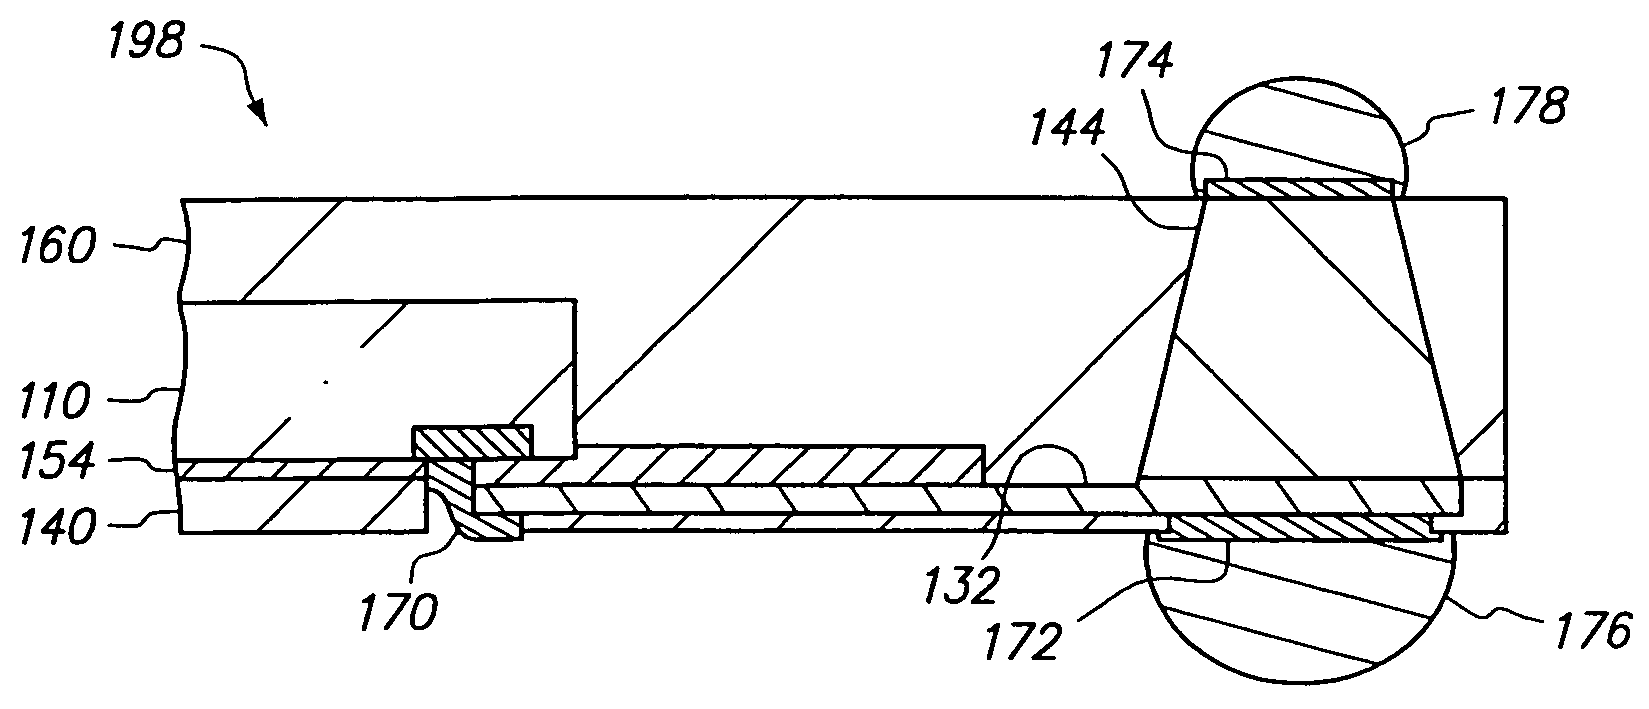 Semiconductor chip assembly with embedded metal pillar